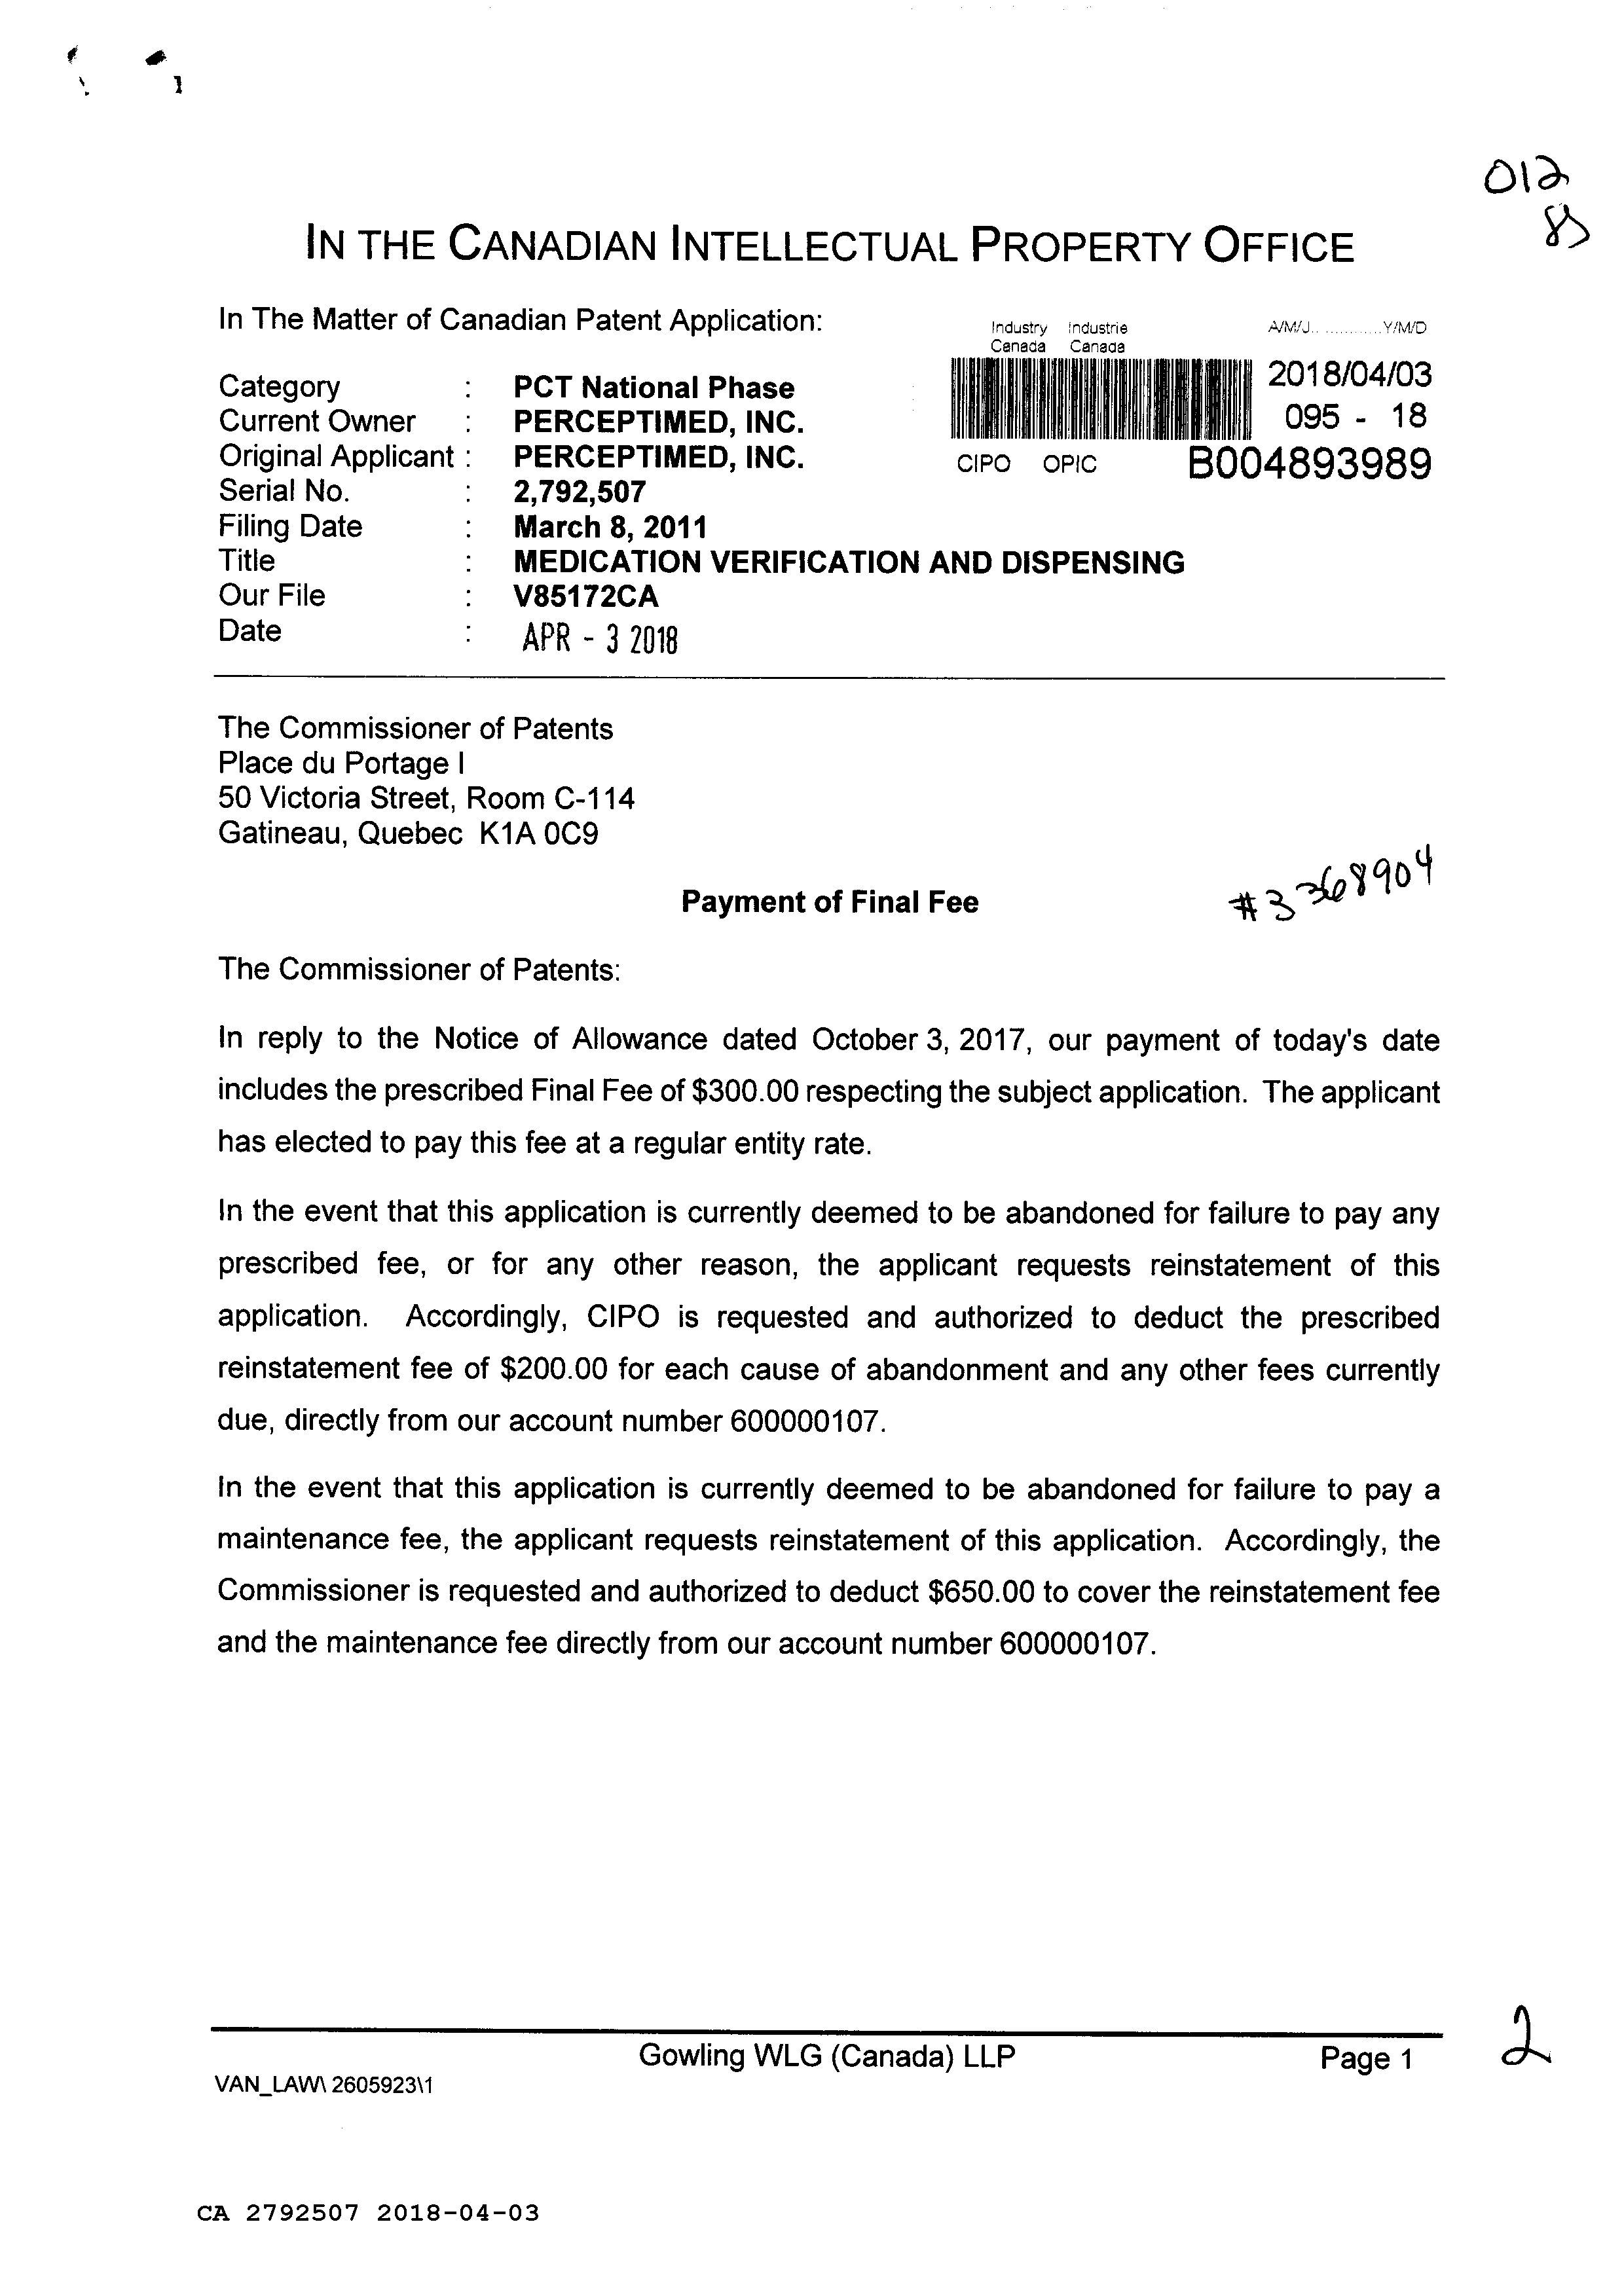 Canadian Patent Document 2792507. Final Fee 20180403. Image 1 of 2